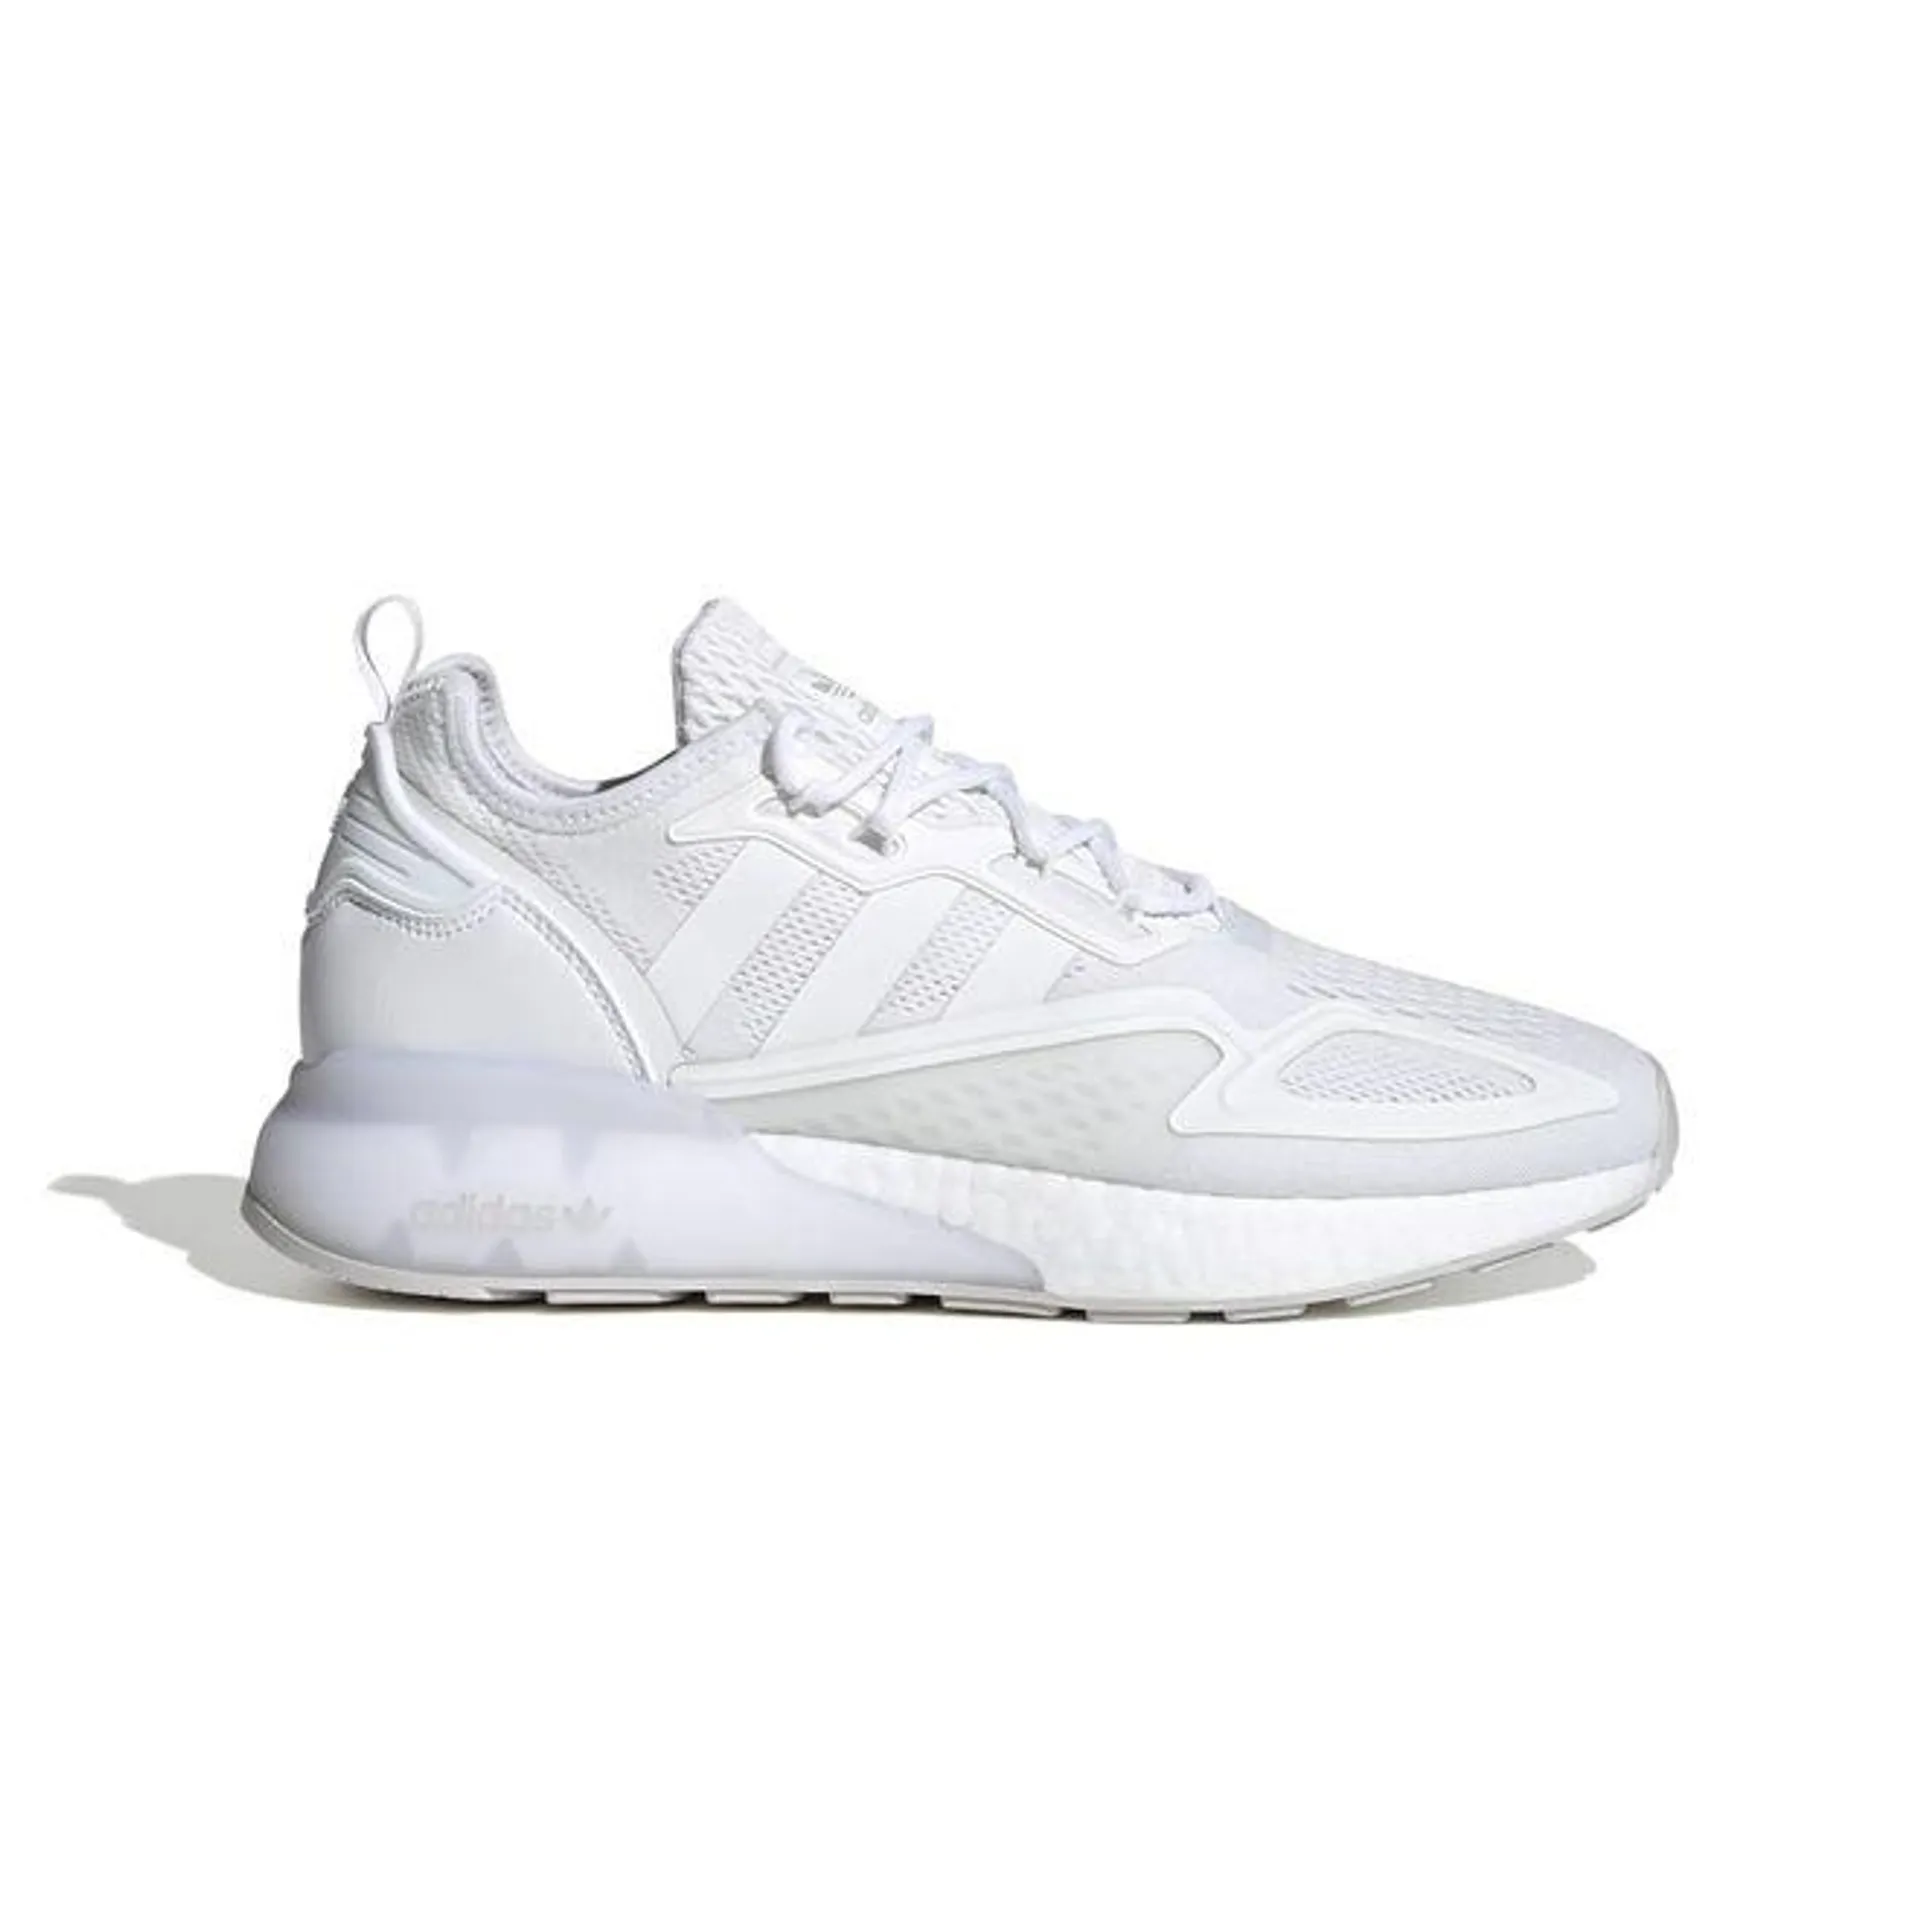 adidas Originals Mens ZX 2K Boost Trainers in White